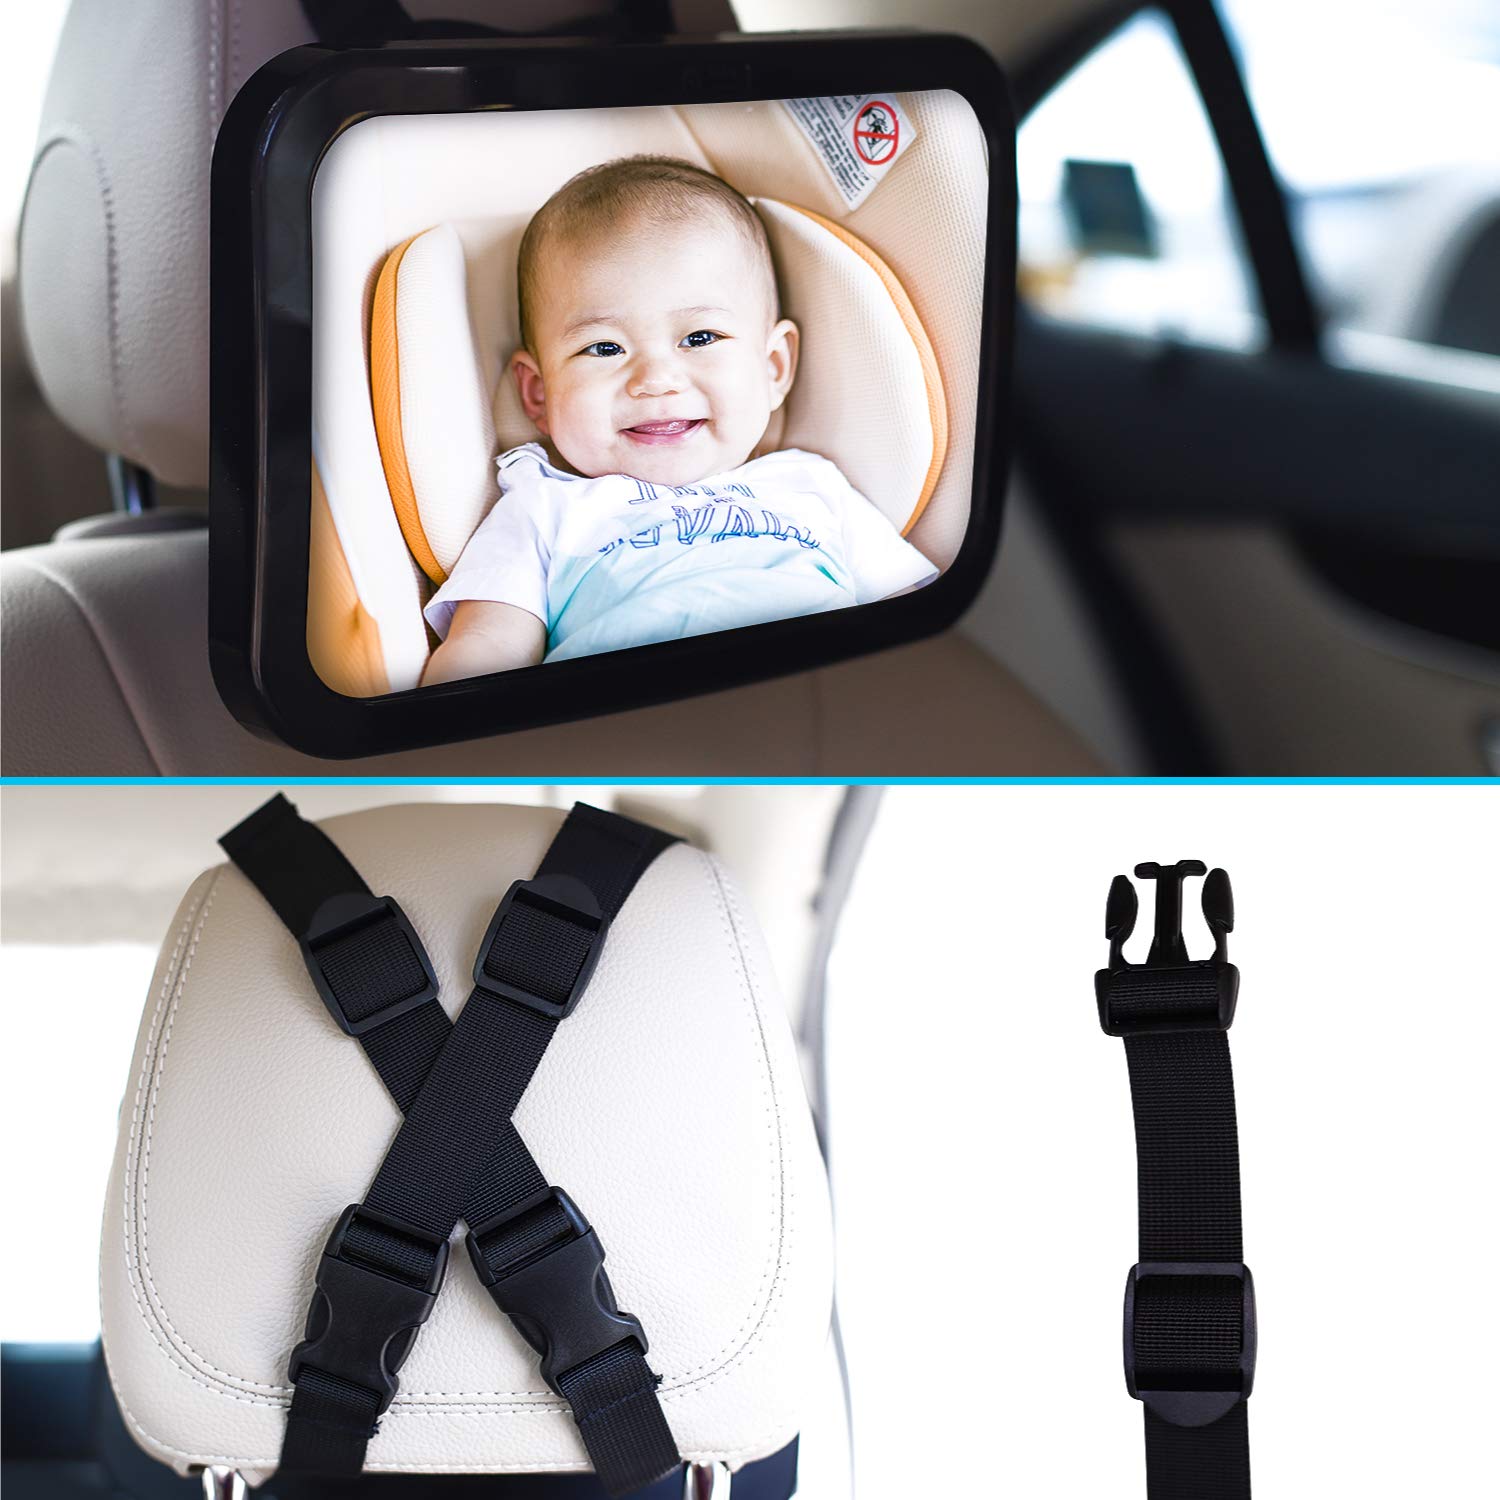 Baby & Mom Back Seat Baby Mirror - Rear View Baby Car Seat Mirror Wide Convex Shatterproof Glass and Fully Assembled - Crash Tested and Certified for Safety (Black)